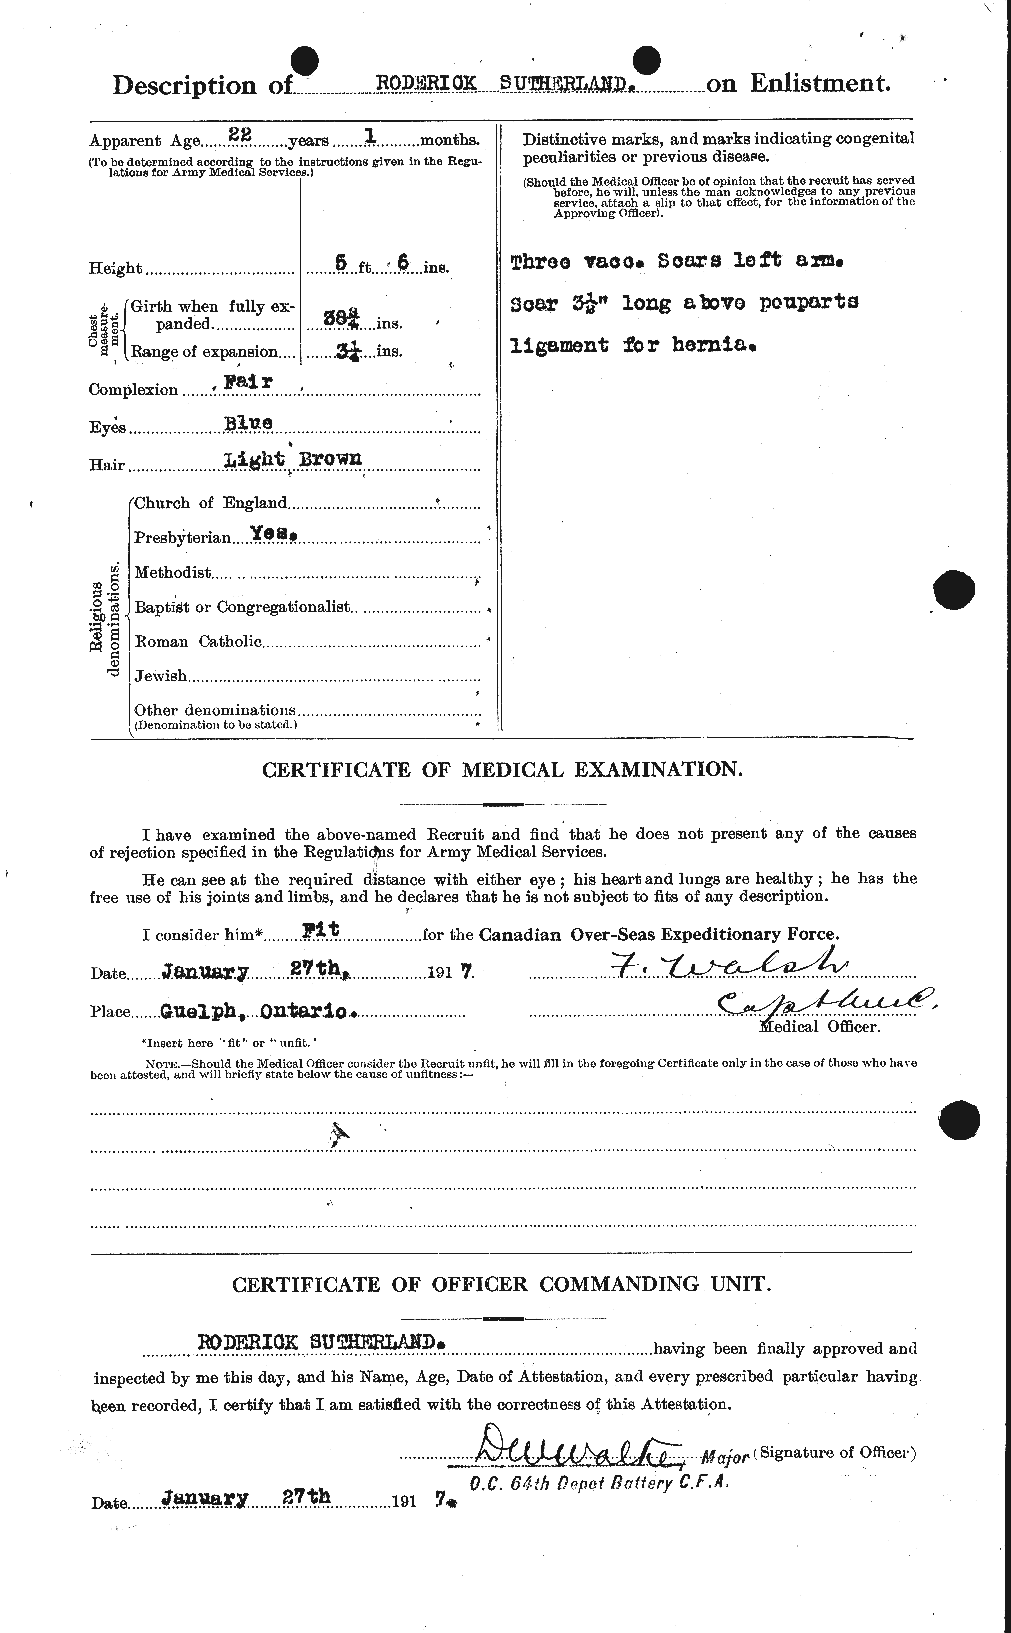 Personnel Records of the First World War - CEF 126568b